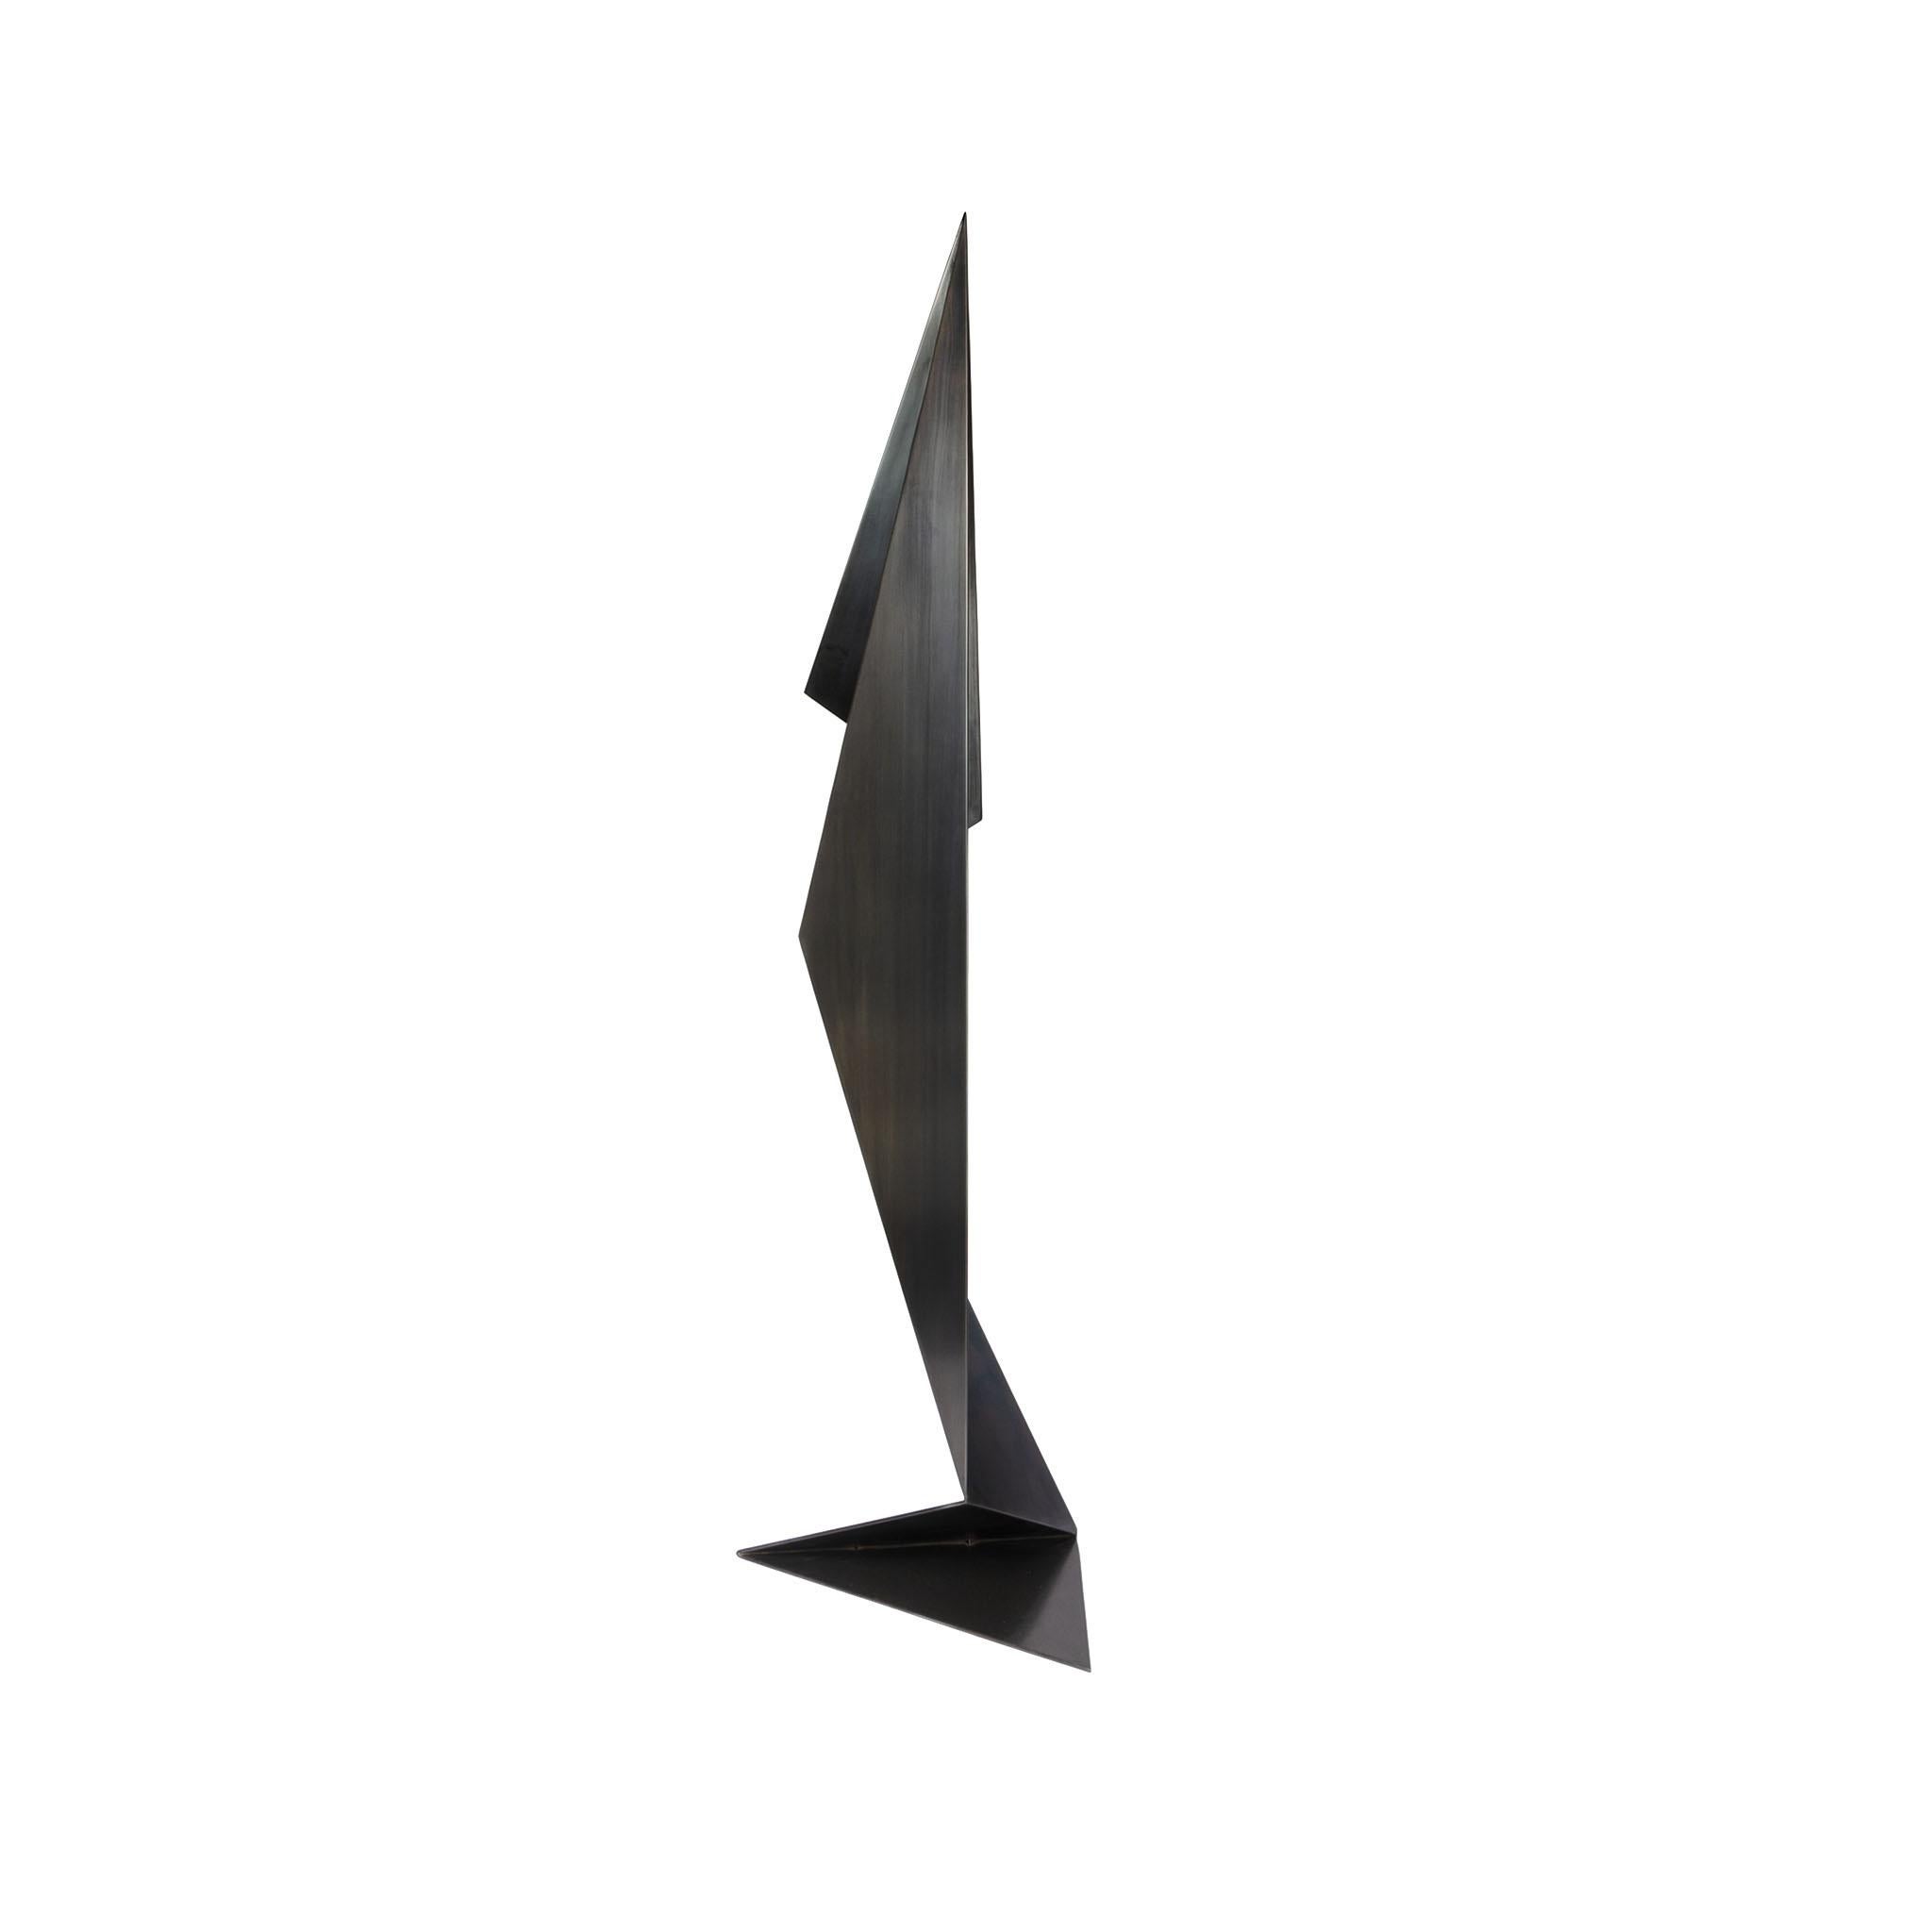 The tall and sleek origami Metal Sculpture is an abstraction of human proportions. The metal folding sculptural figure builds on the contradiction between its strong metal material and triangular form. Inspired by the traditional paper craft of